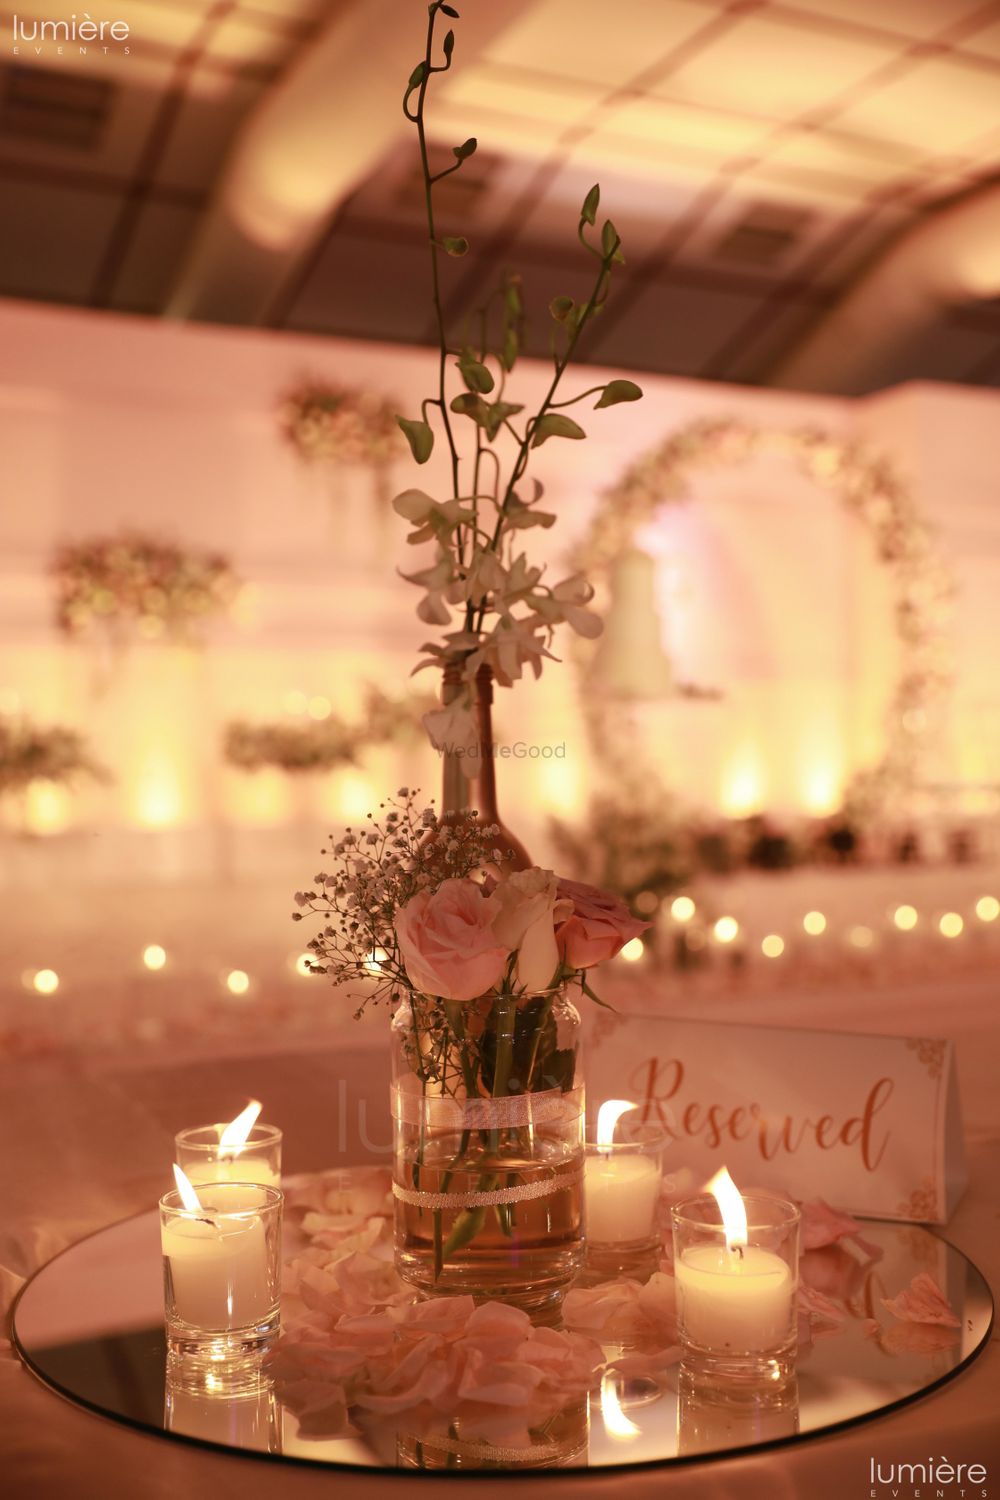 Photo From Tanya + George - By Lumiere Events